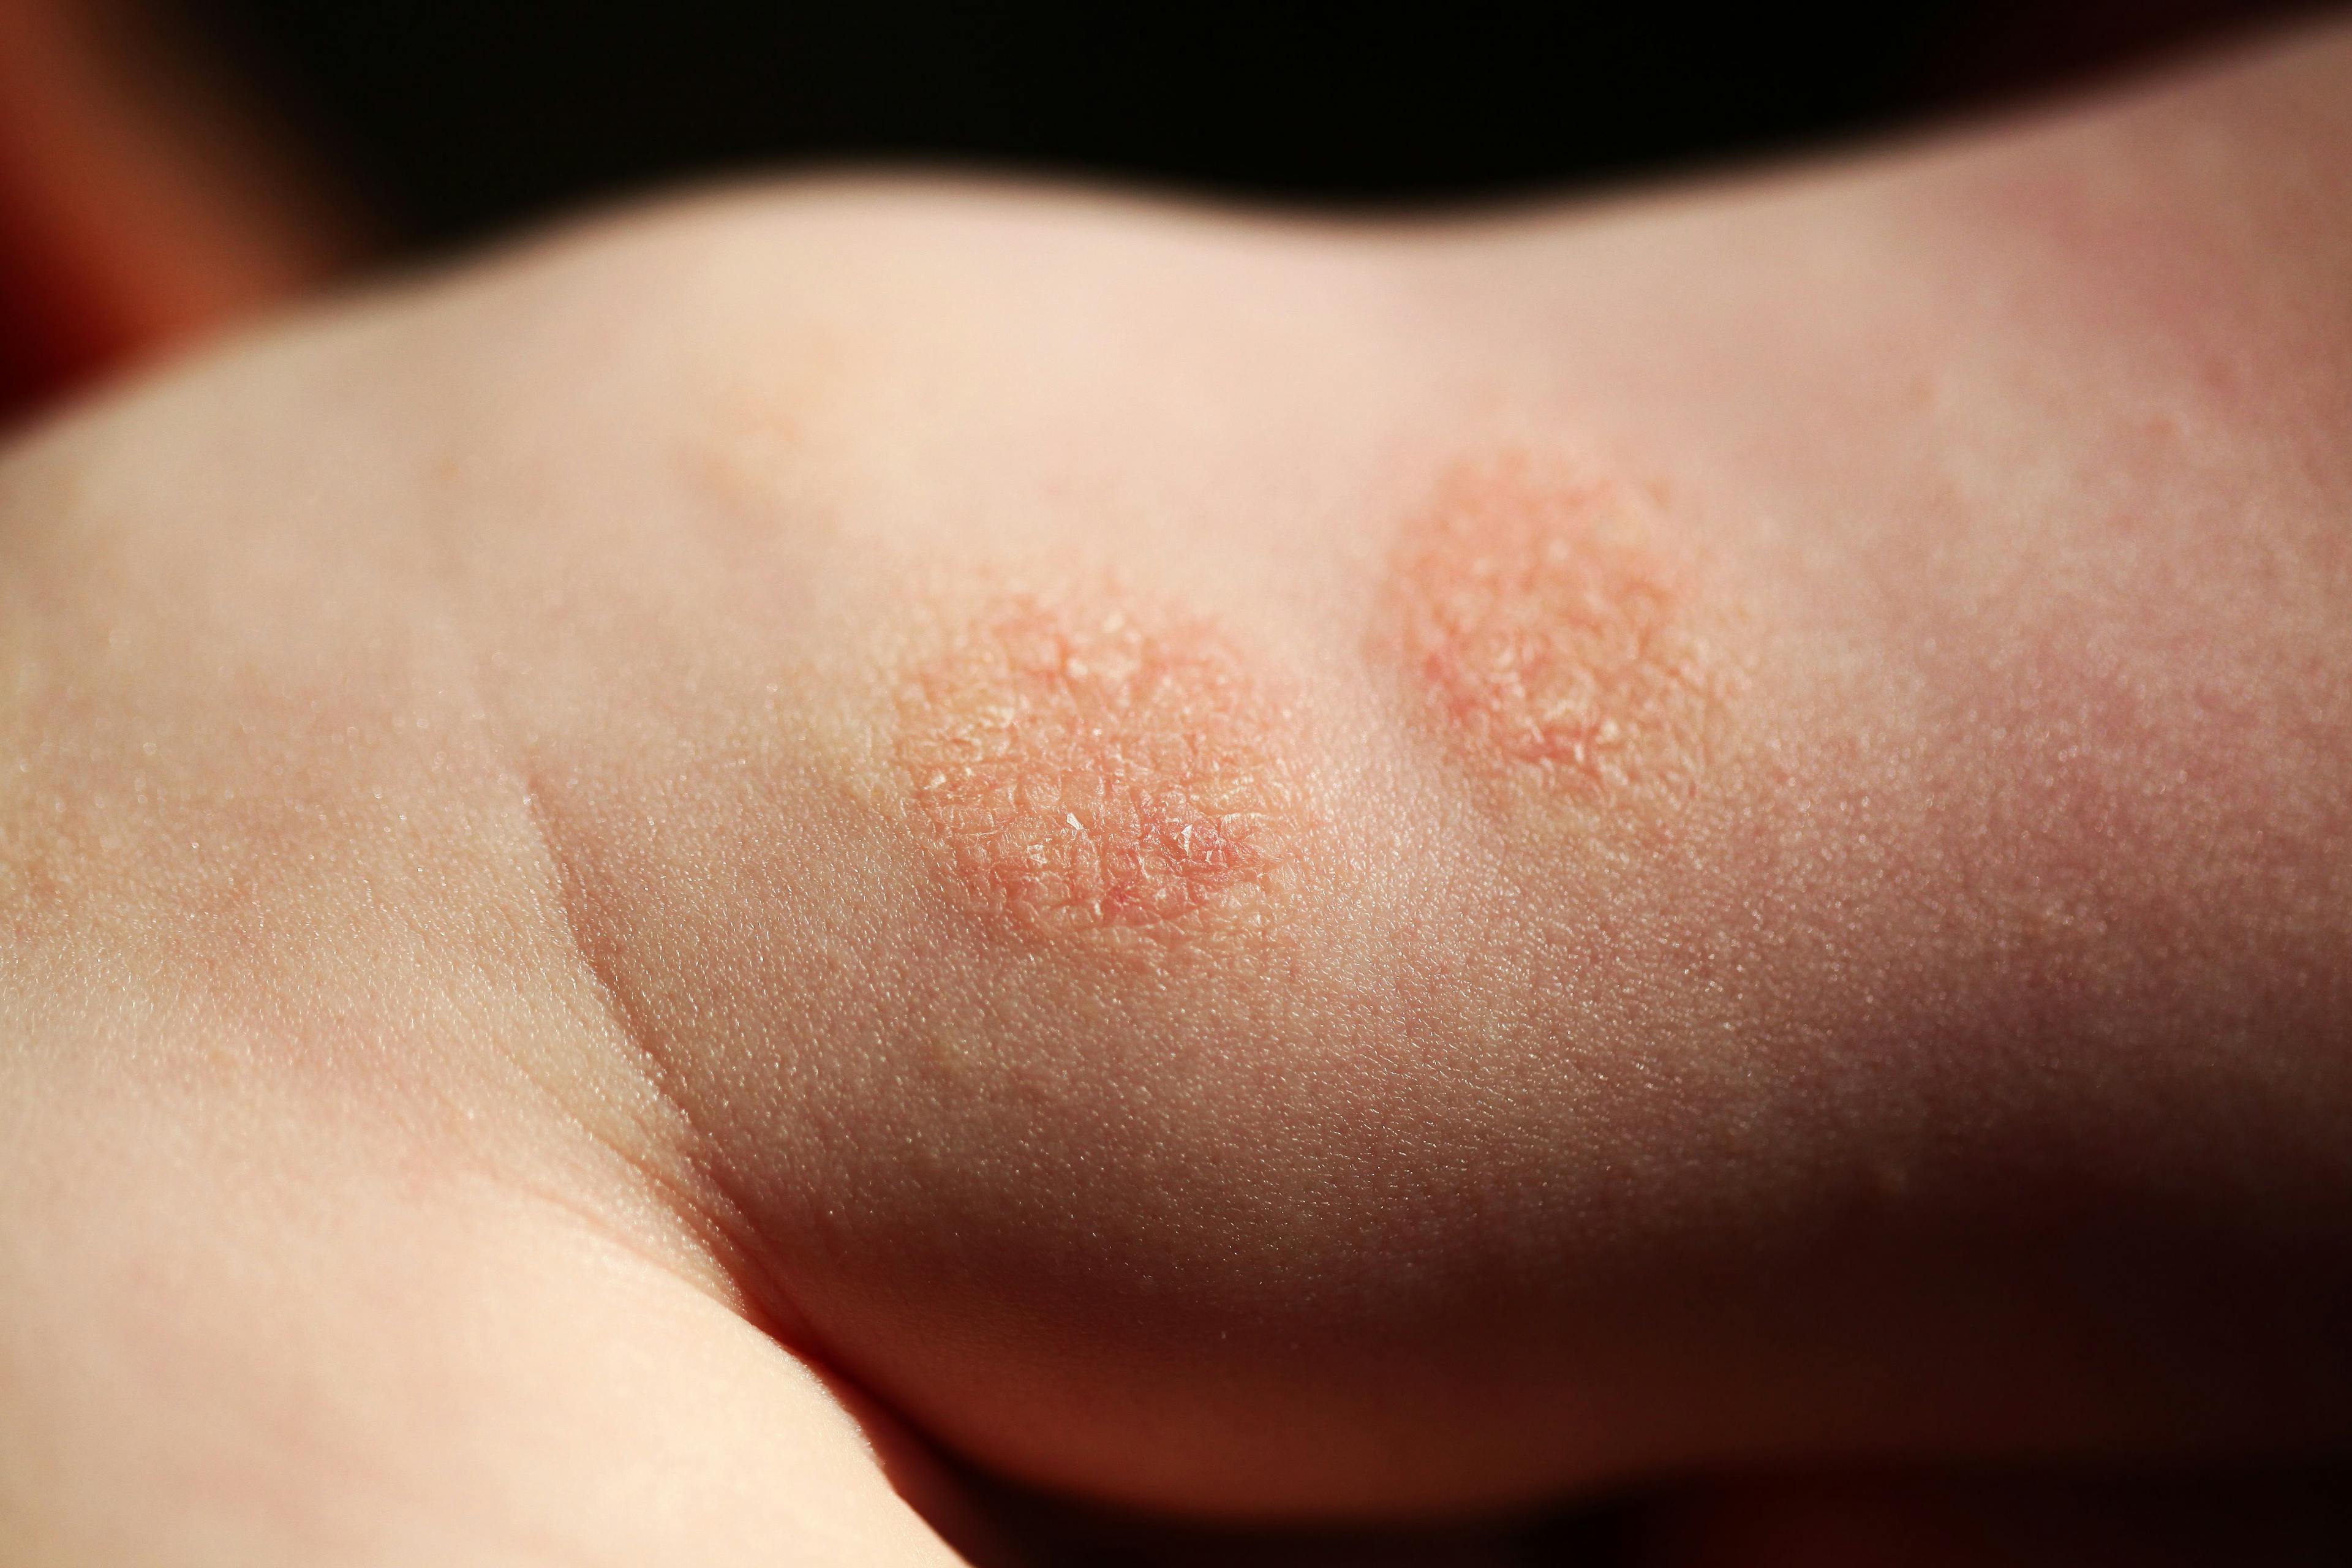 Review examines different ways to reduce costs for atopic dermatitis treatment